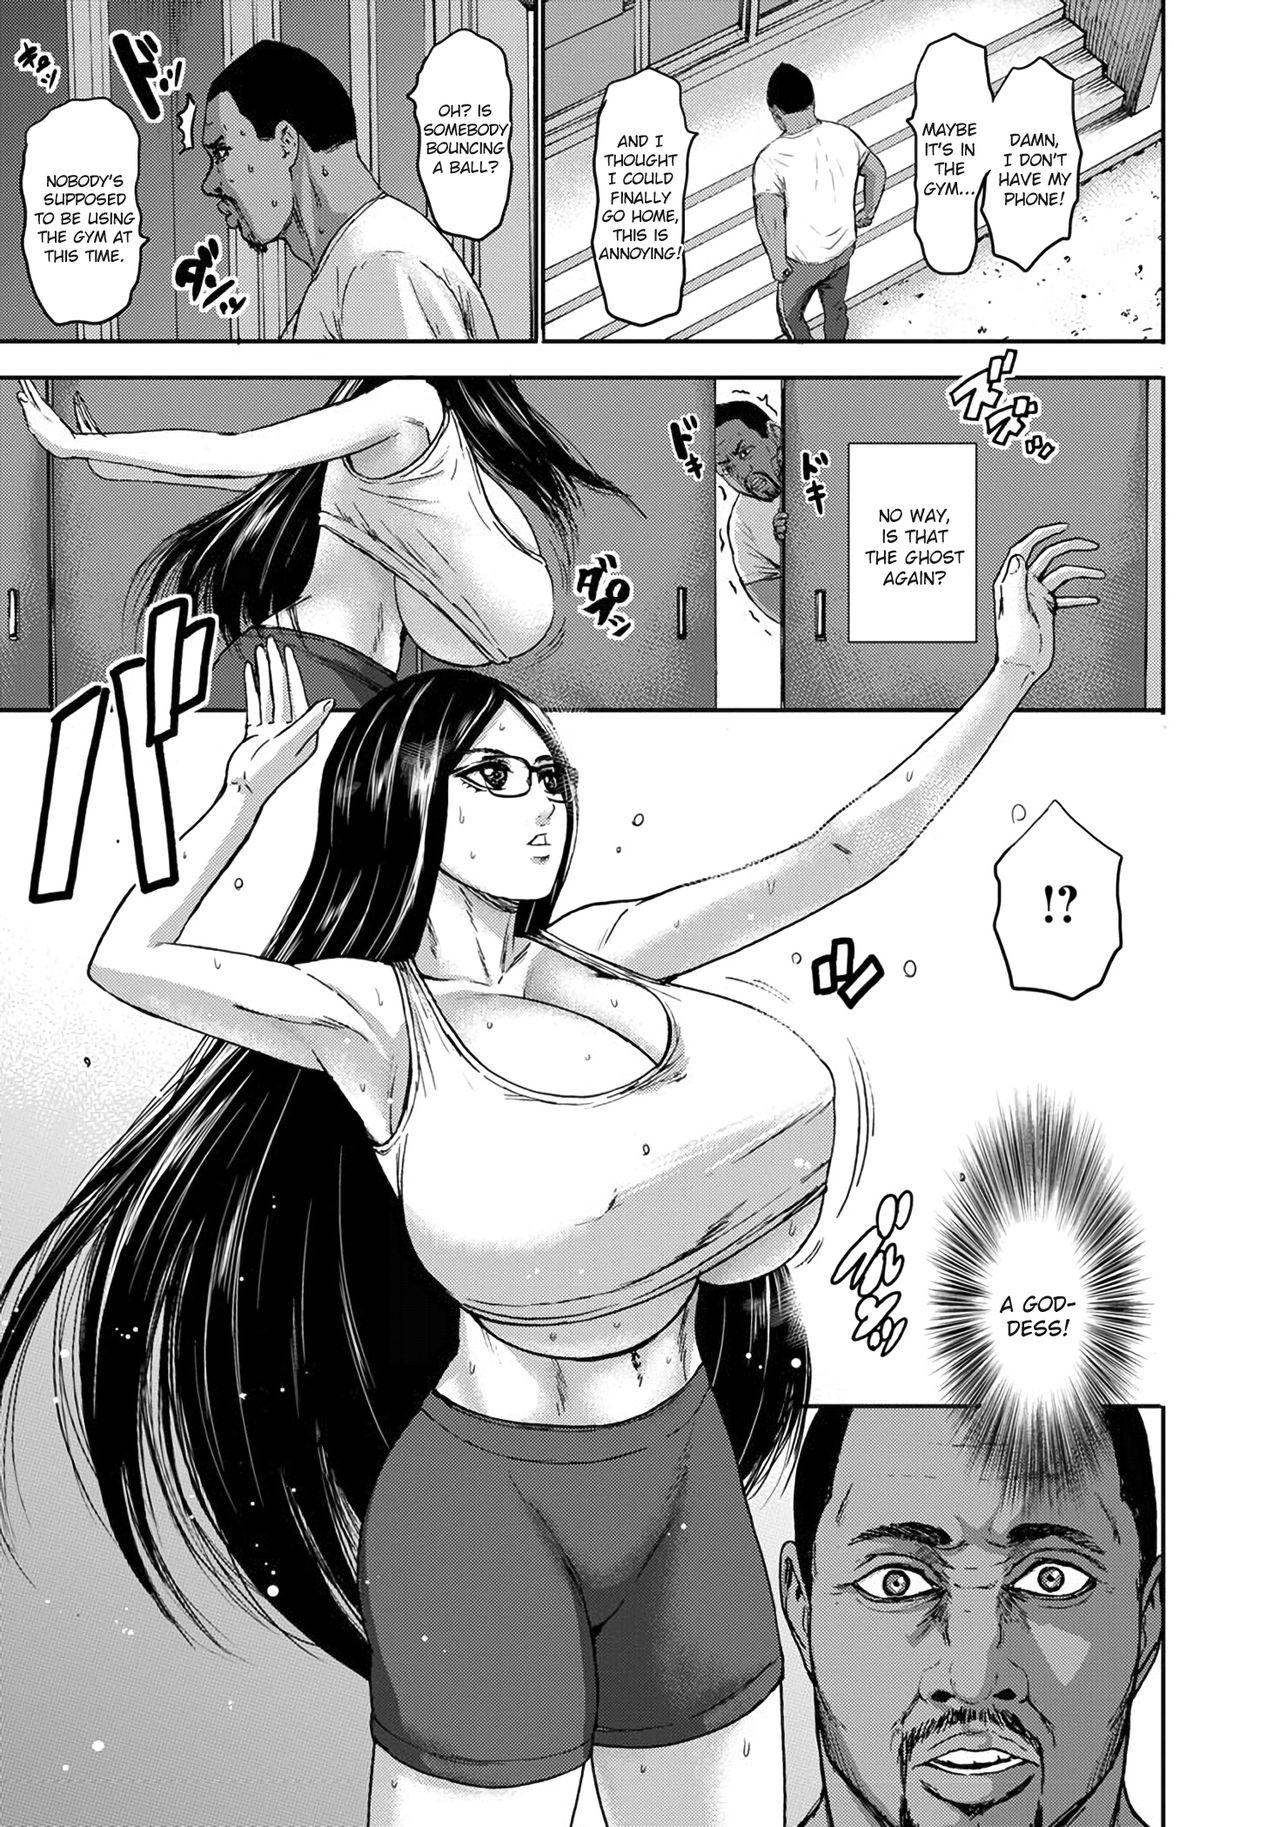 Secret Chounyuu Gaiden | Academy for Huge Breasts - Side story Cheating - Page 3